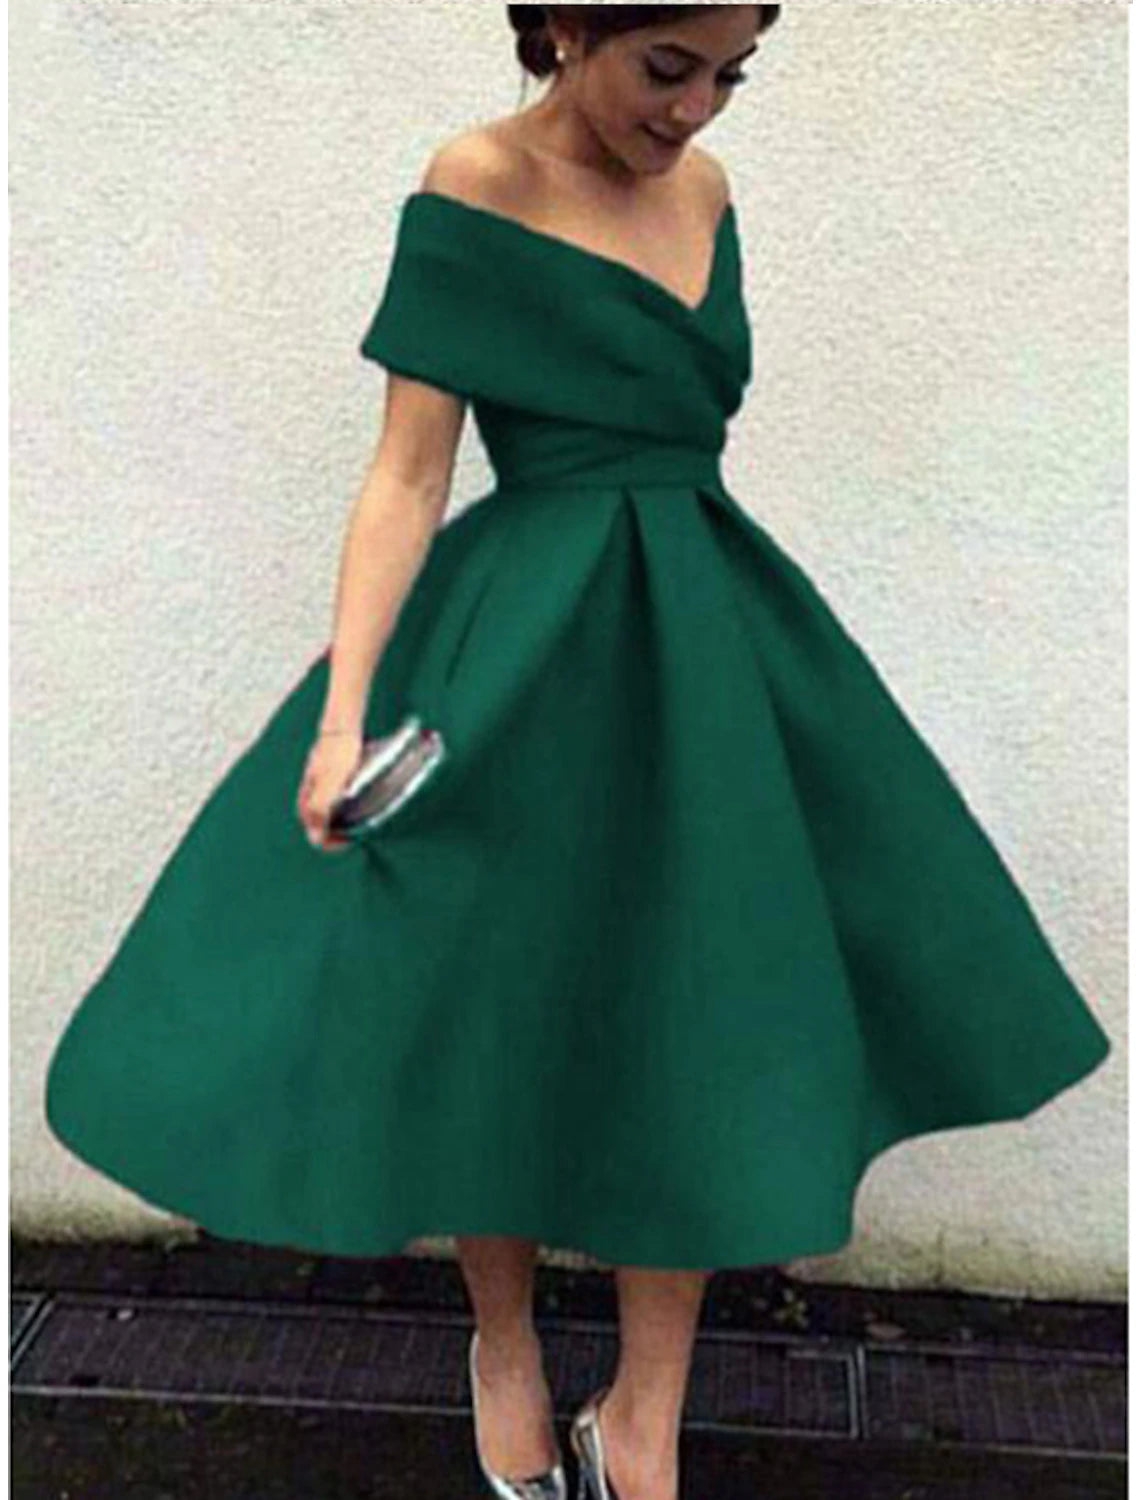 A-Line Cocktail Dresses 1950s Dress Wedding Guest Christmas Red Green Dress Tea Length Short Sleeve V Neck Stretch Fabric V Back with Pleats